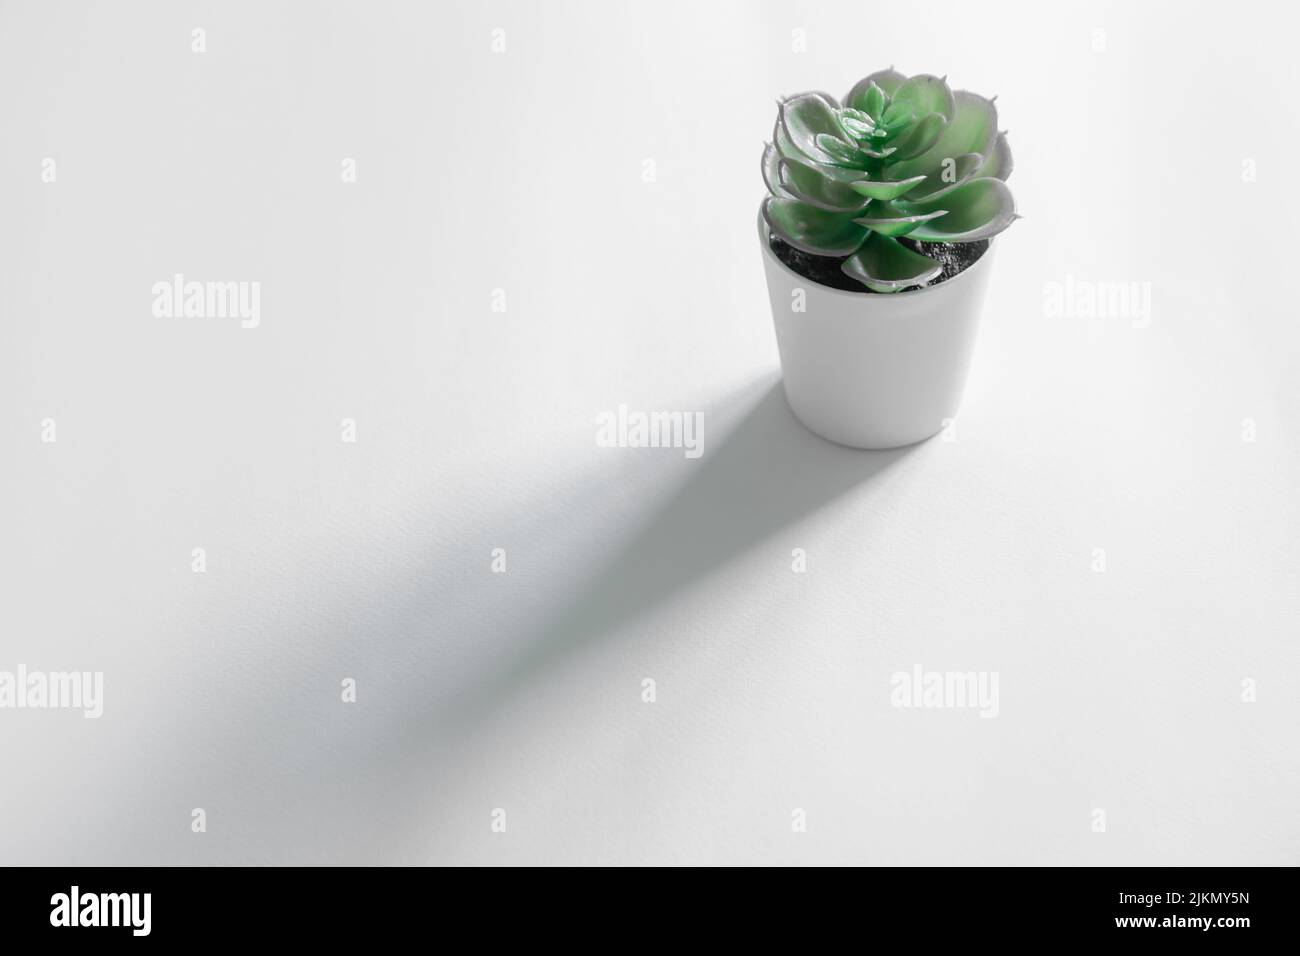 A small mexican snow ball (Echeveria elegans) plant in a white pot on a white surface Stock Photo